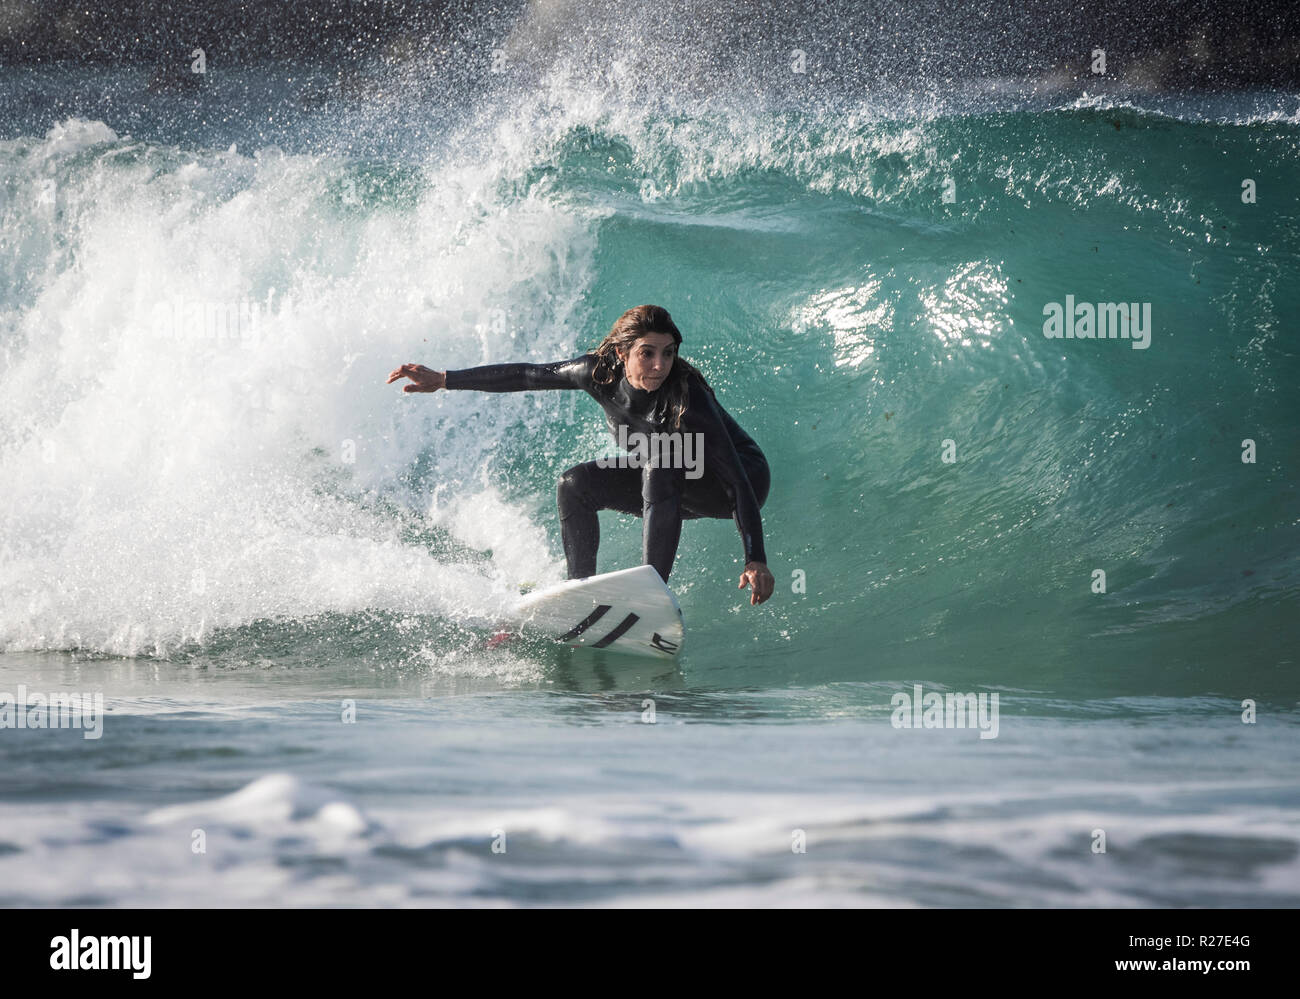 Woman surfer in action. Stock Photo